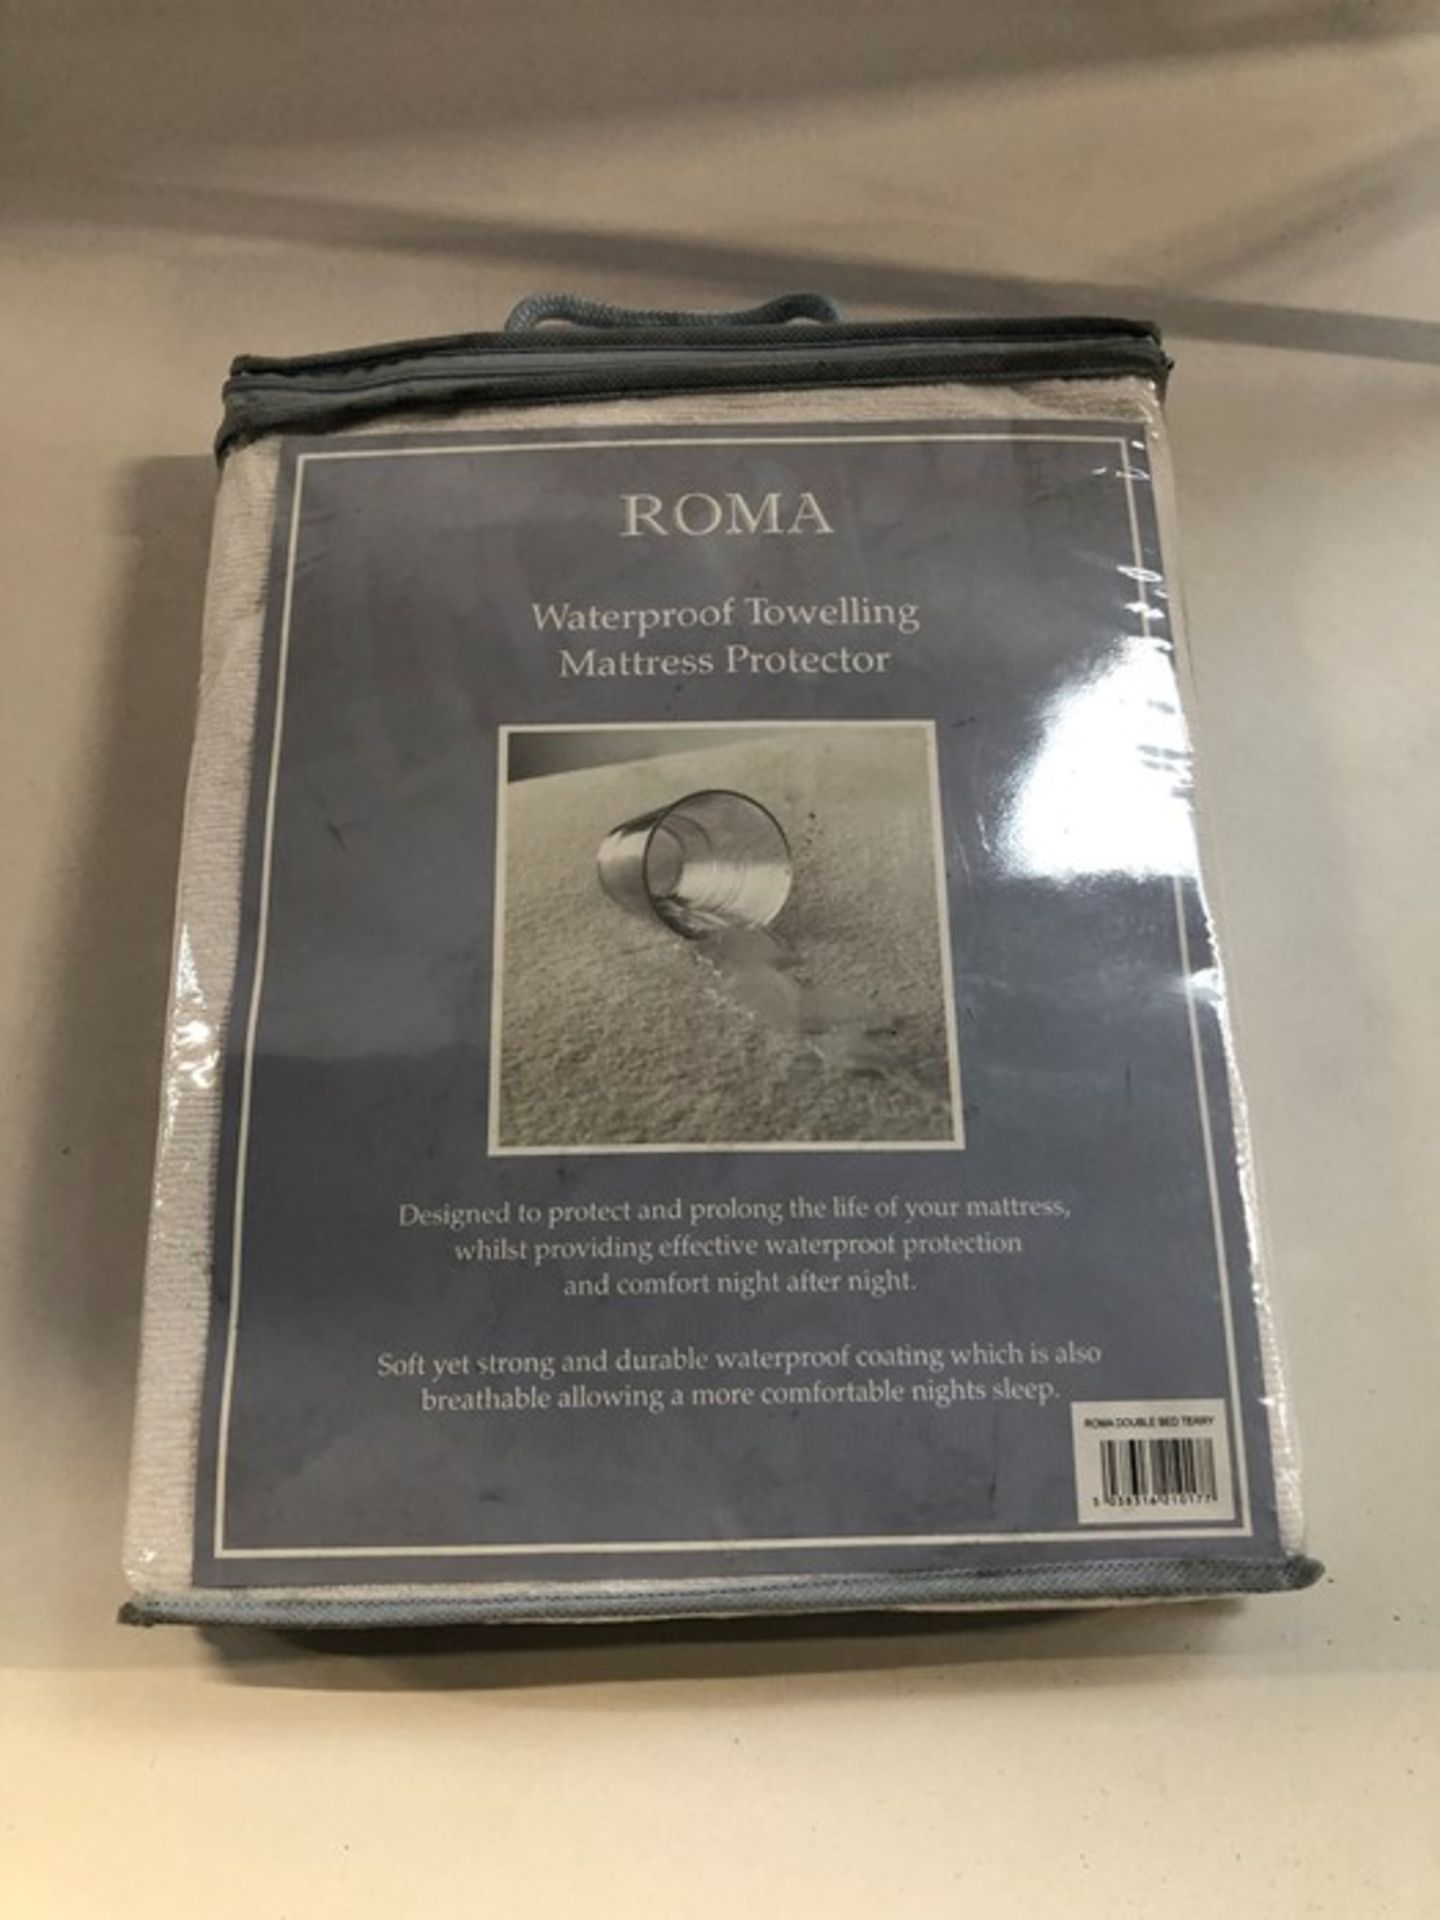 1 BAGGED ROMA DOUBLE BED WATERPROOF TOWELLING MATTRESS PROTECTOR (PUBLIC VIEWING AVAILABLE)